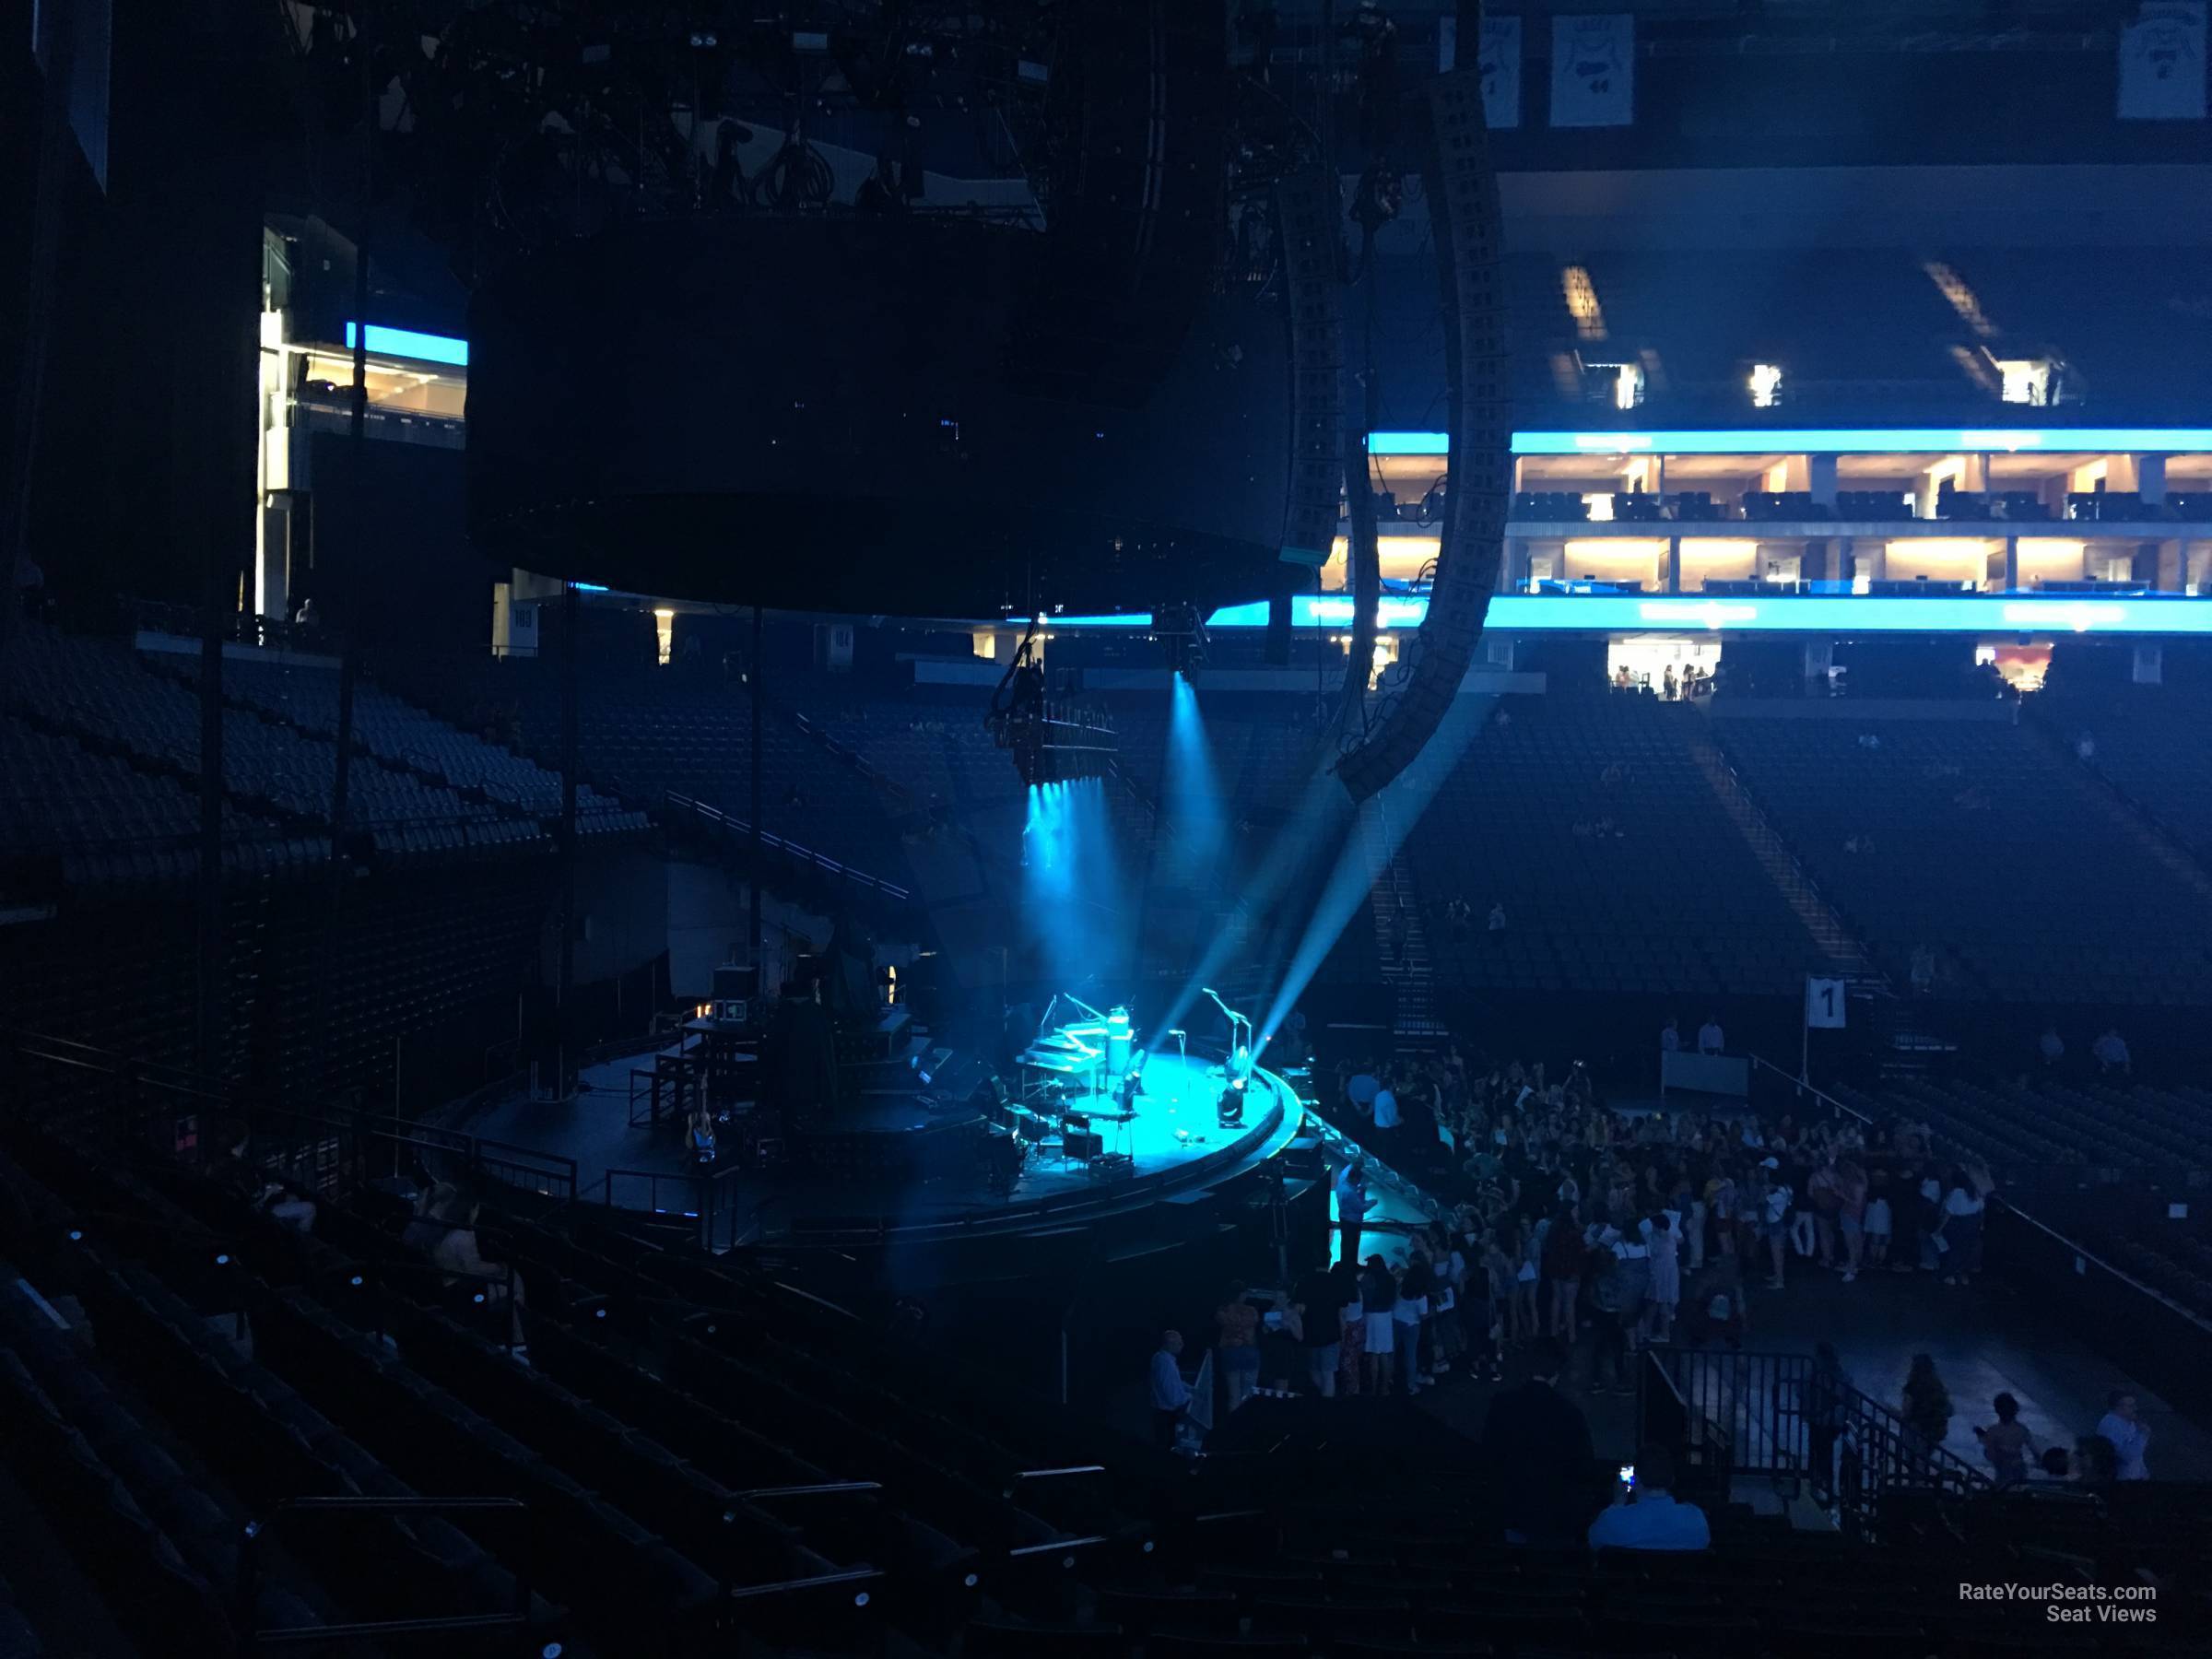 Section 122 at Golden 1 Center for Concerts